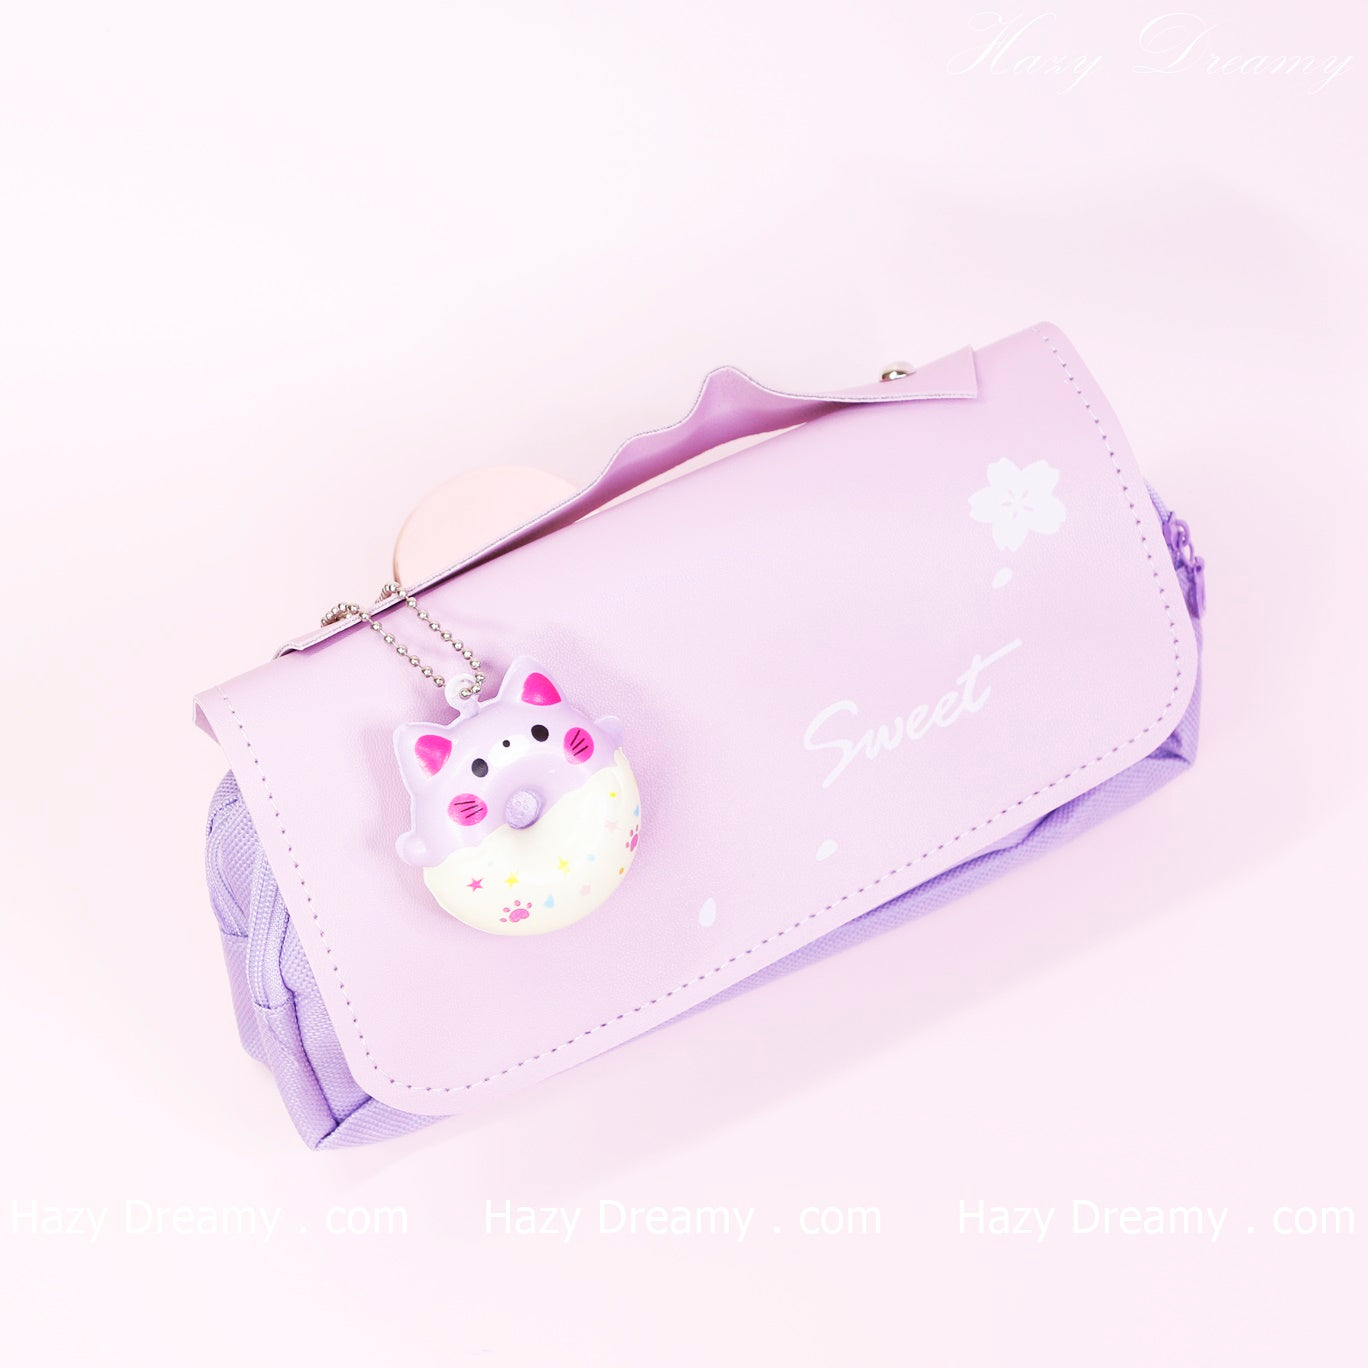 Cute Cat Pen & Pencil Case - Adorable Stationery Organizer for Girls